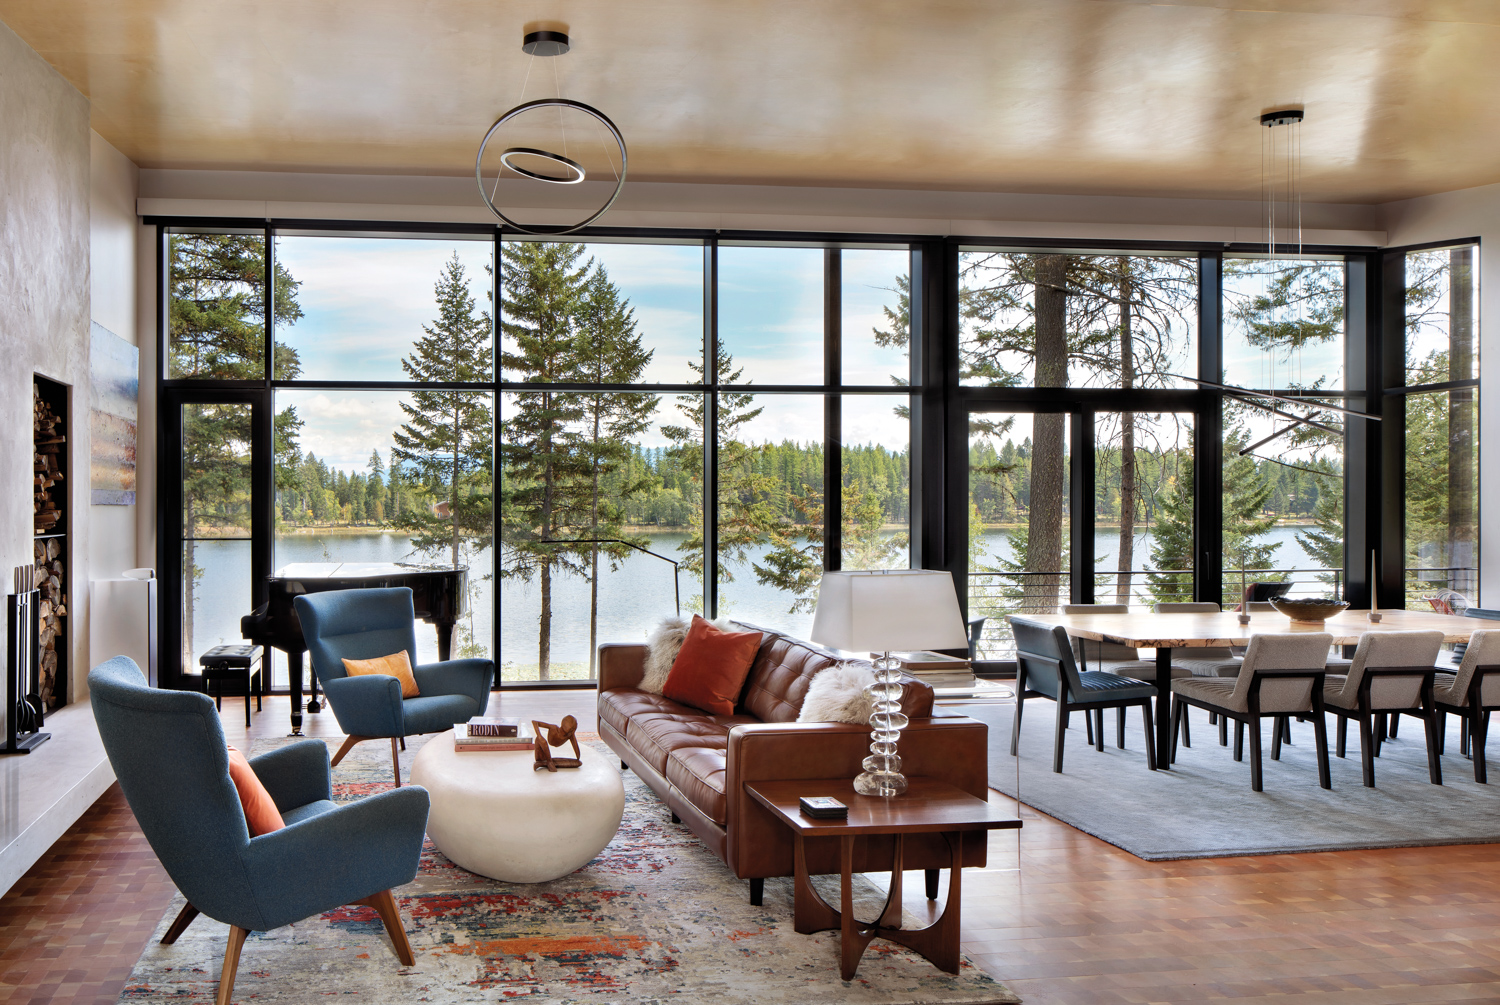 A Modern Montana Home Carefully Blends In With Nature